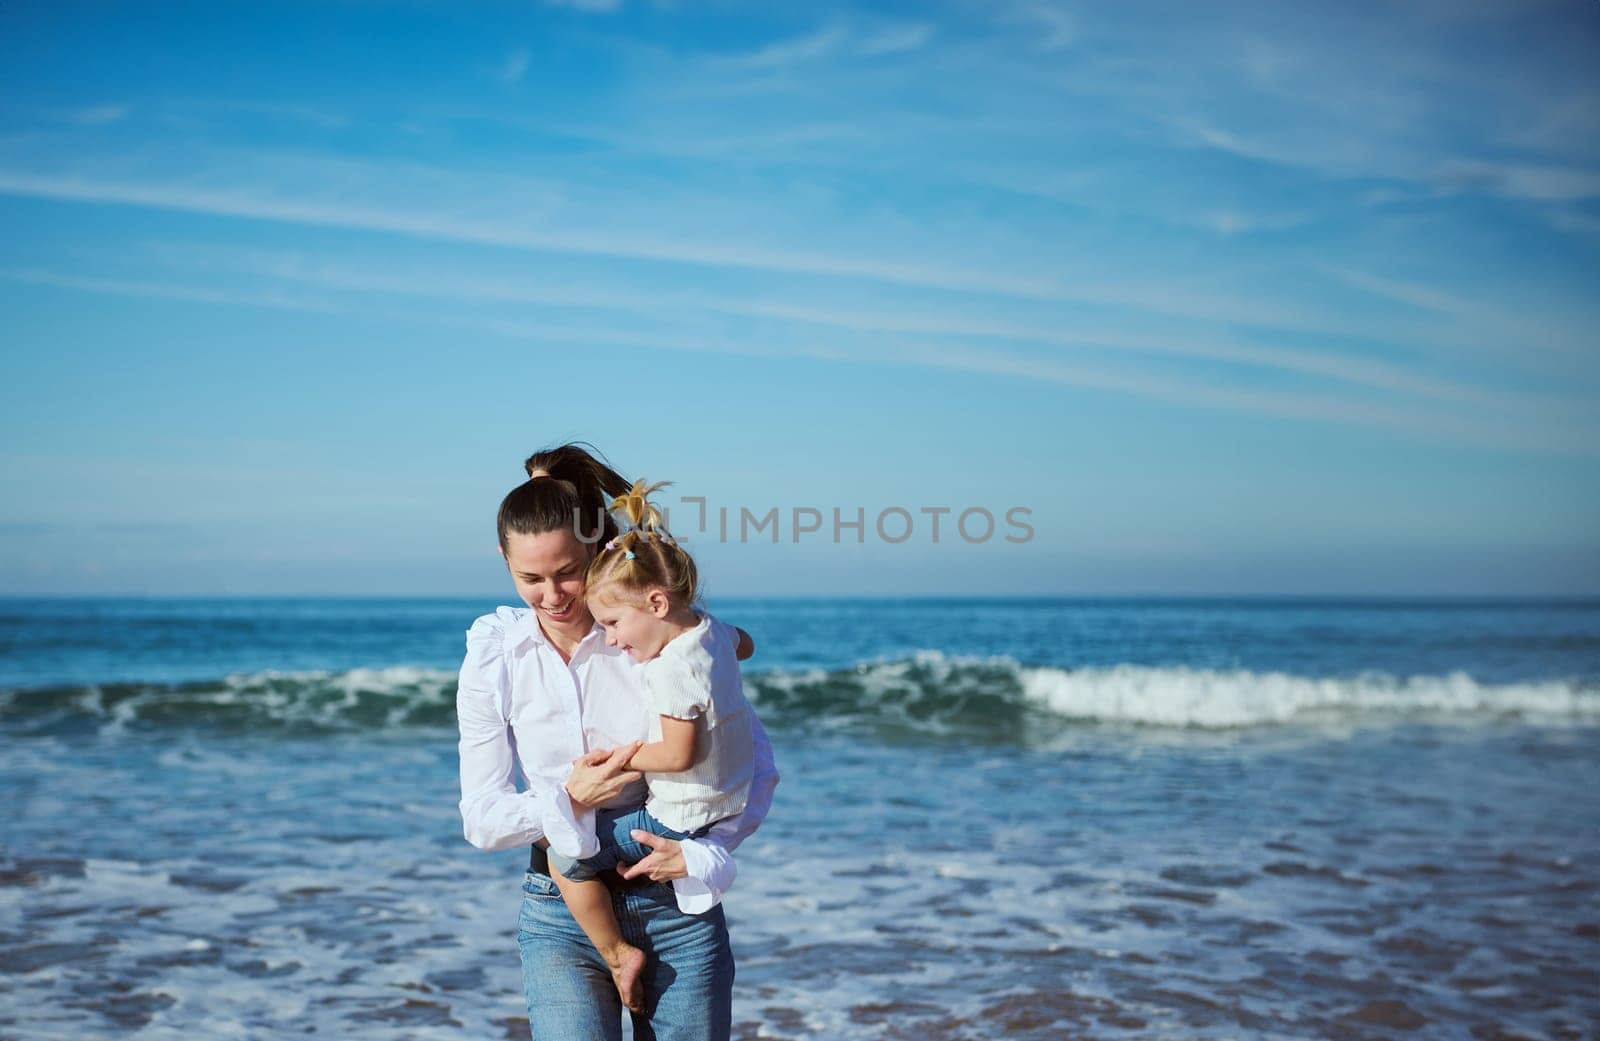 Happy smiling woman mother carrying her little daughter, enjoying a weekend together, walking along a tropical beach by artgf